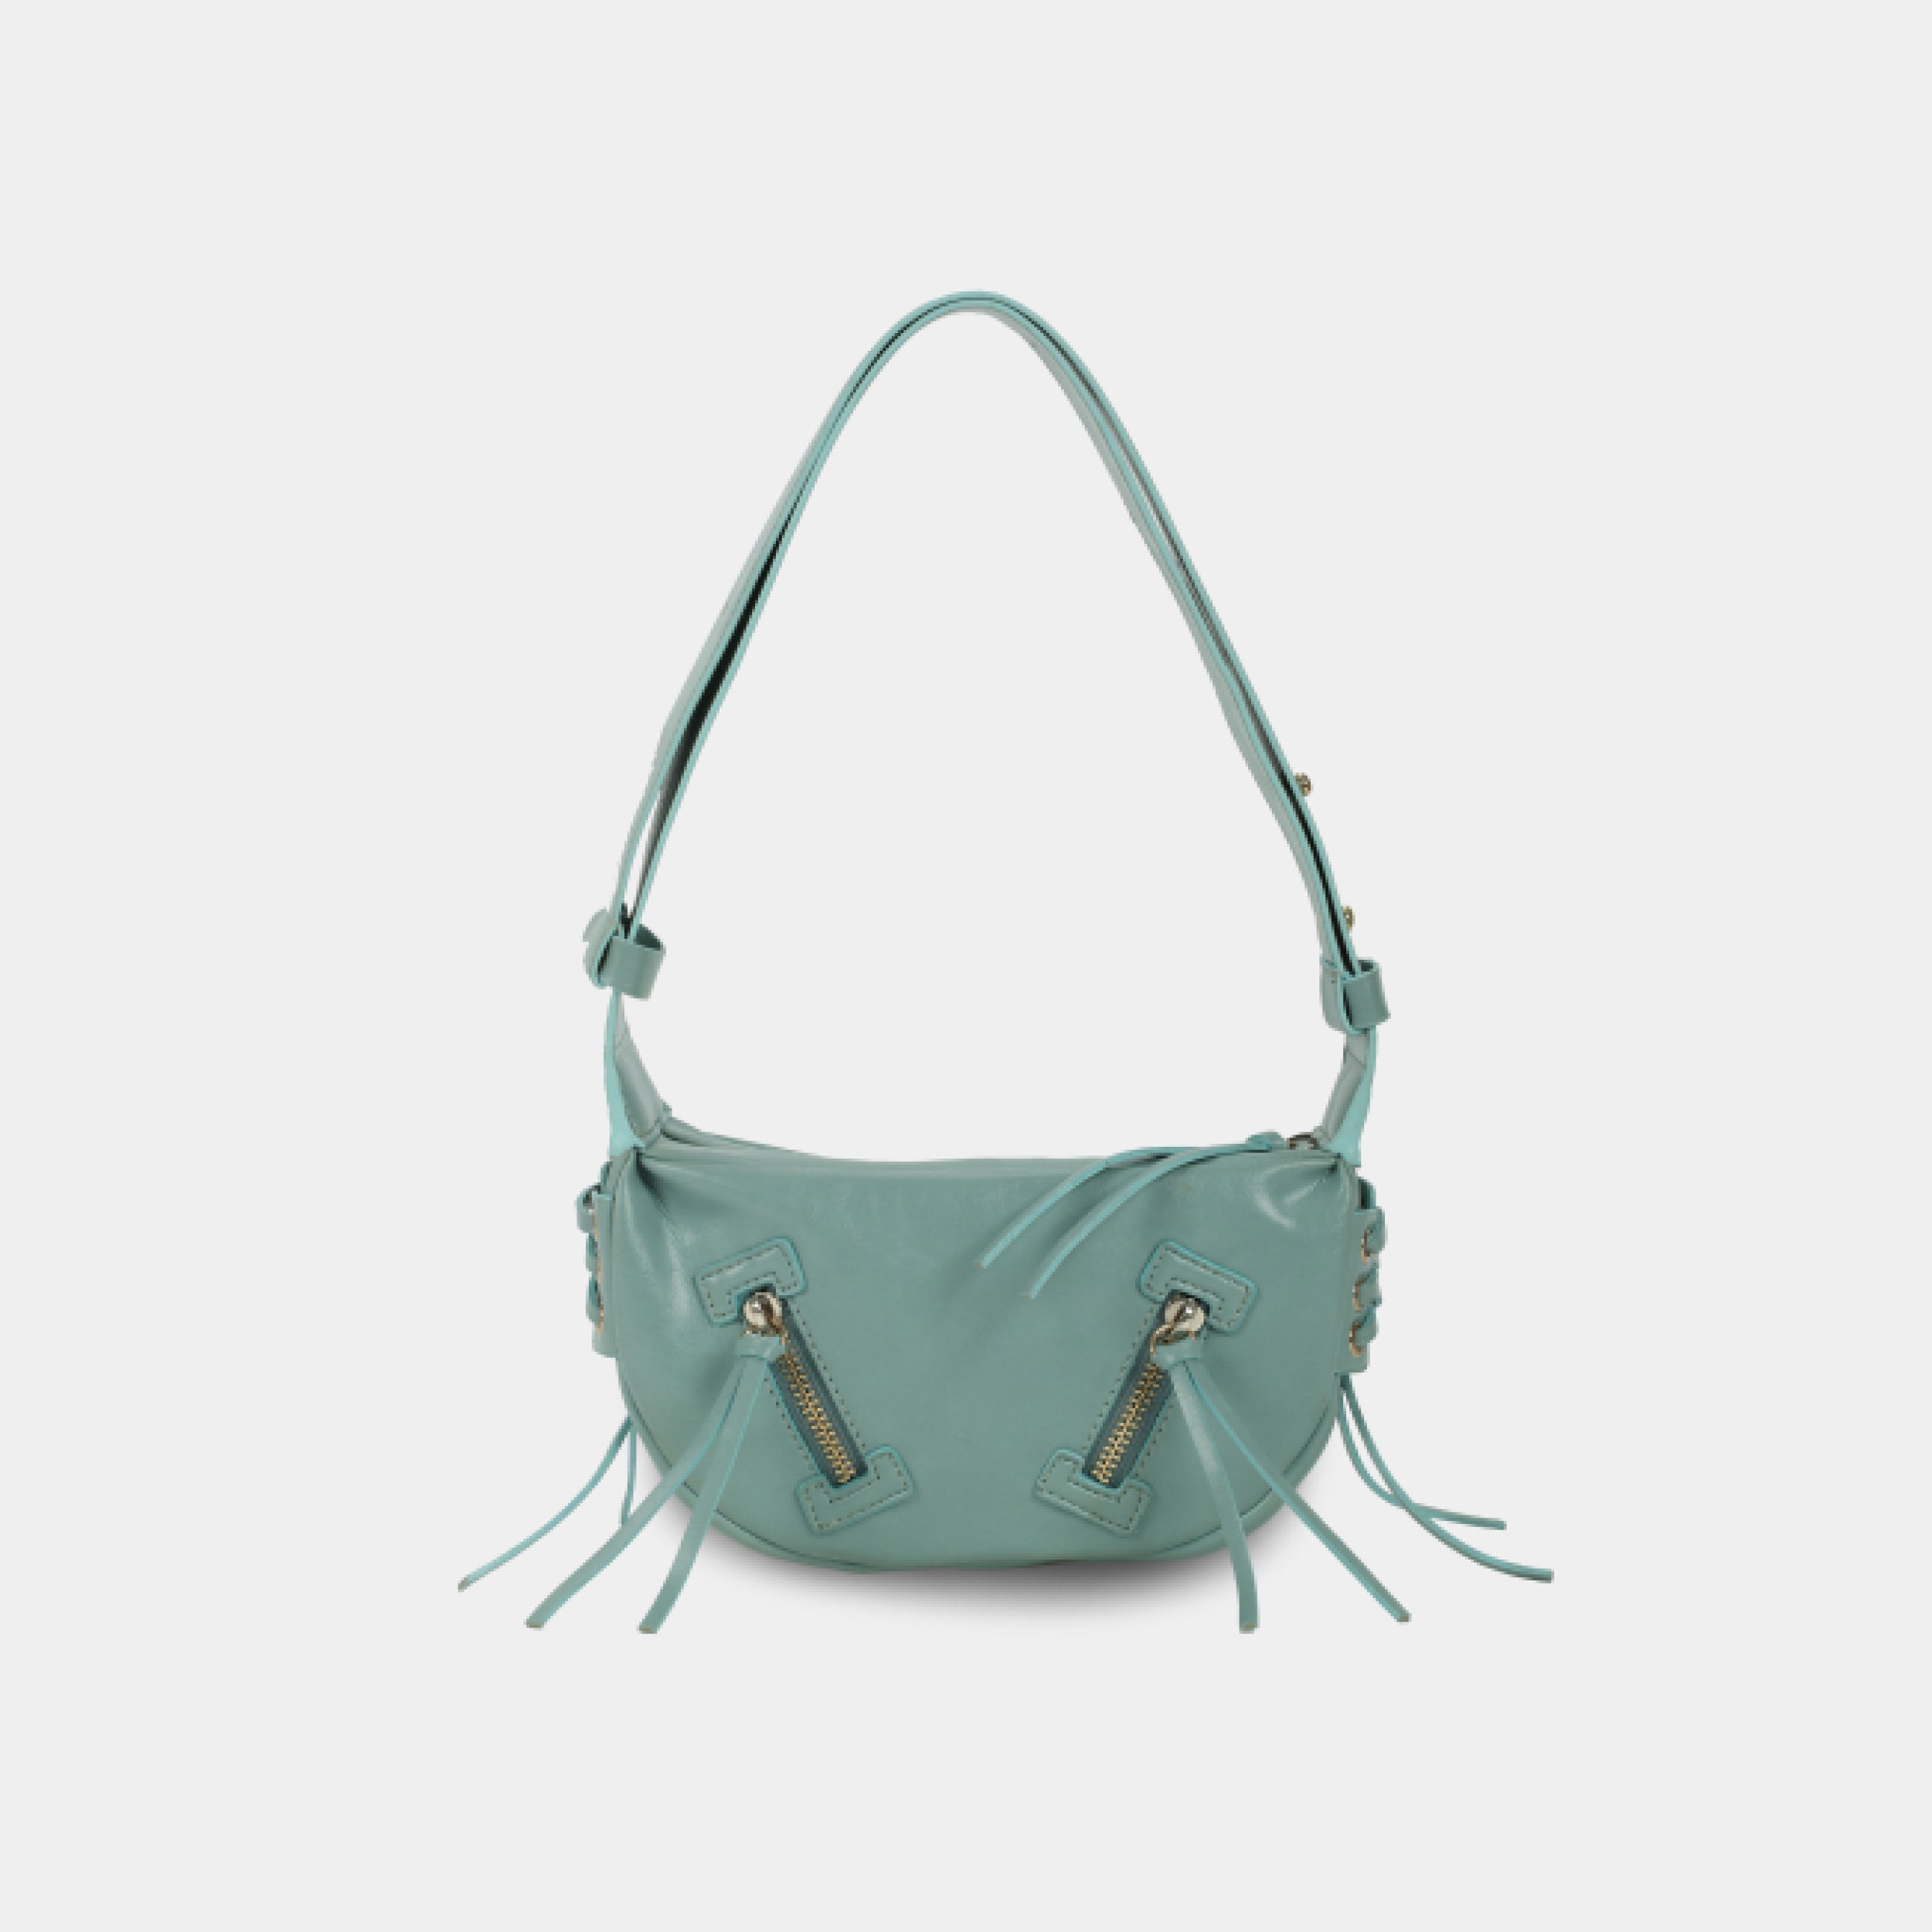 LACE bag small size (S) pastel turquoise